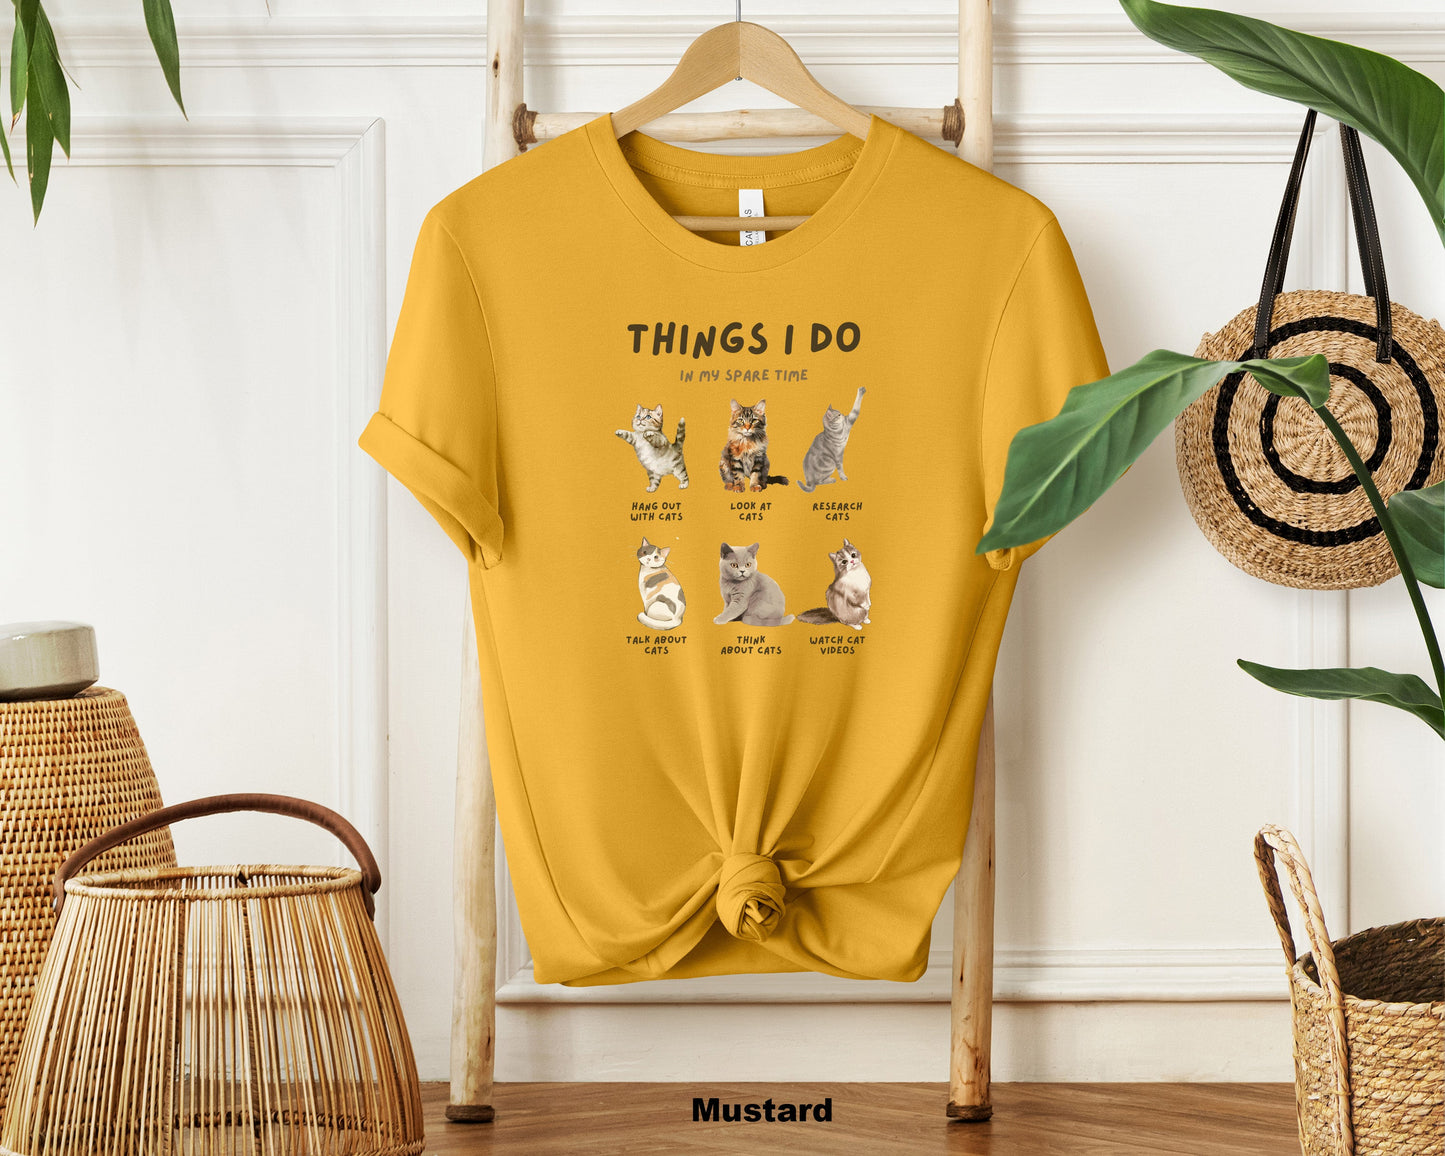 "Cat Lover's Classic Crewneck T-Shirt - Things I do in my spare time, Soft Cotton Tee for Cat Owners"